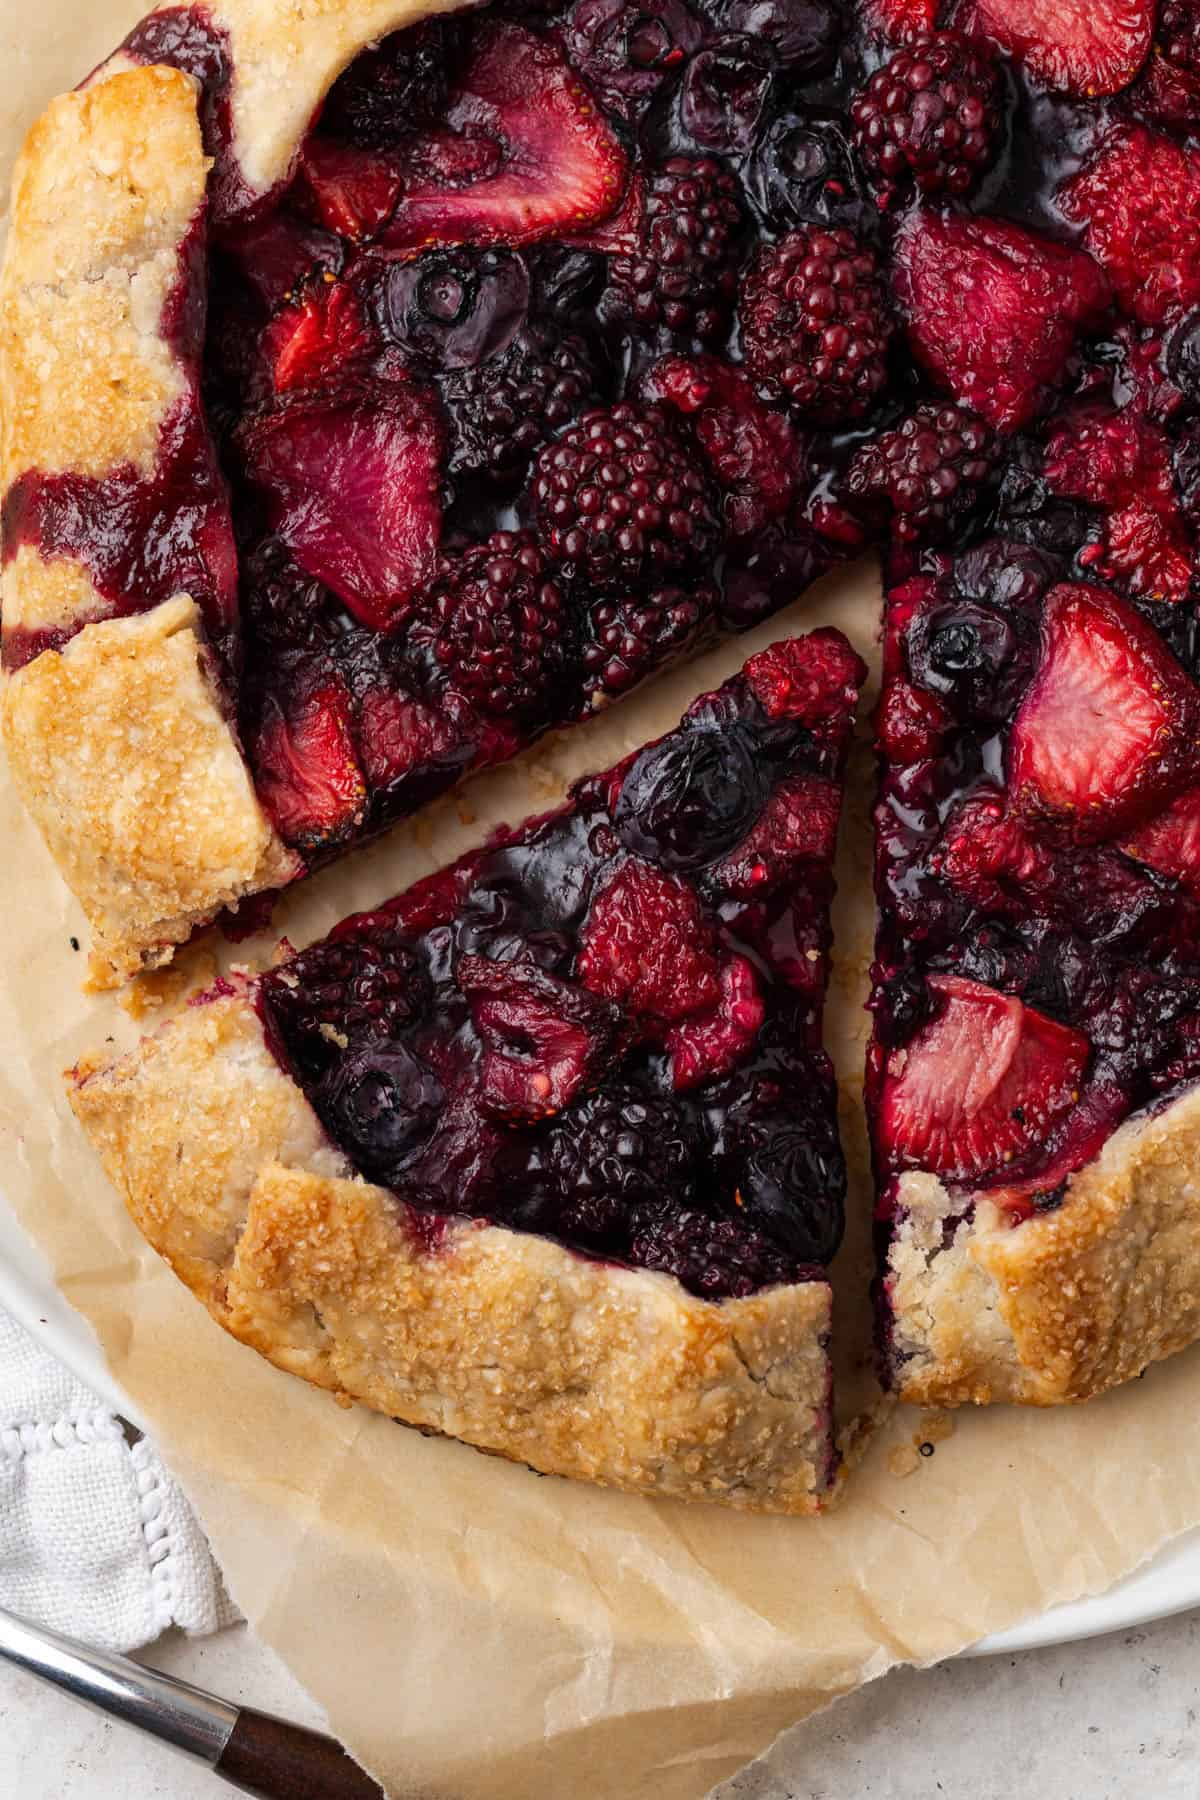 Closeup view of a fully baked berry galette on top of parchment paper.